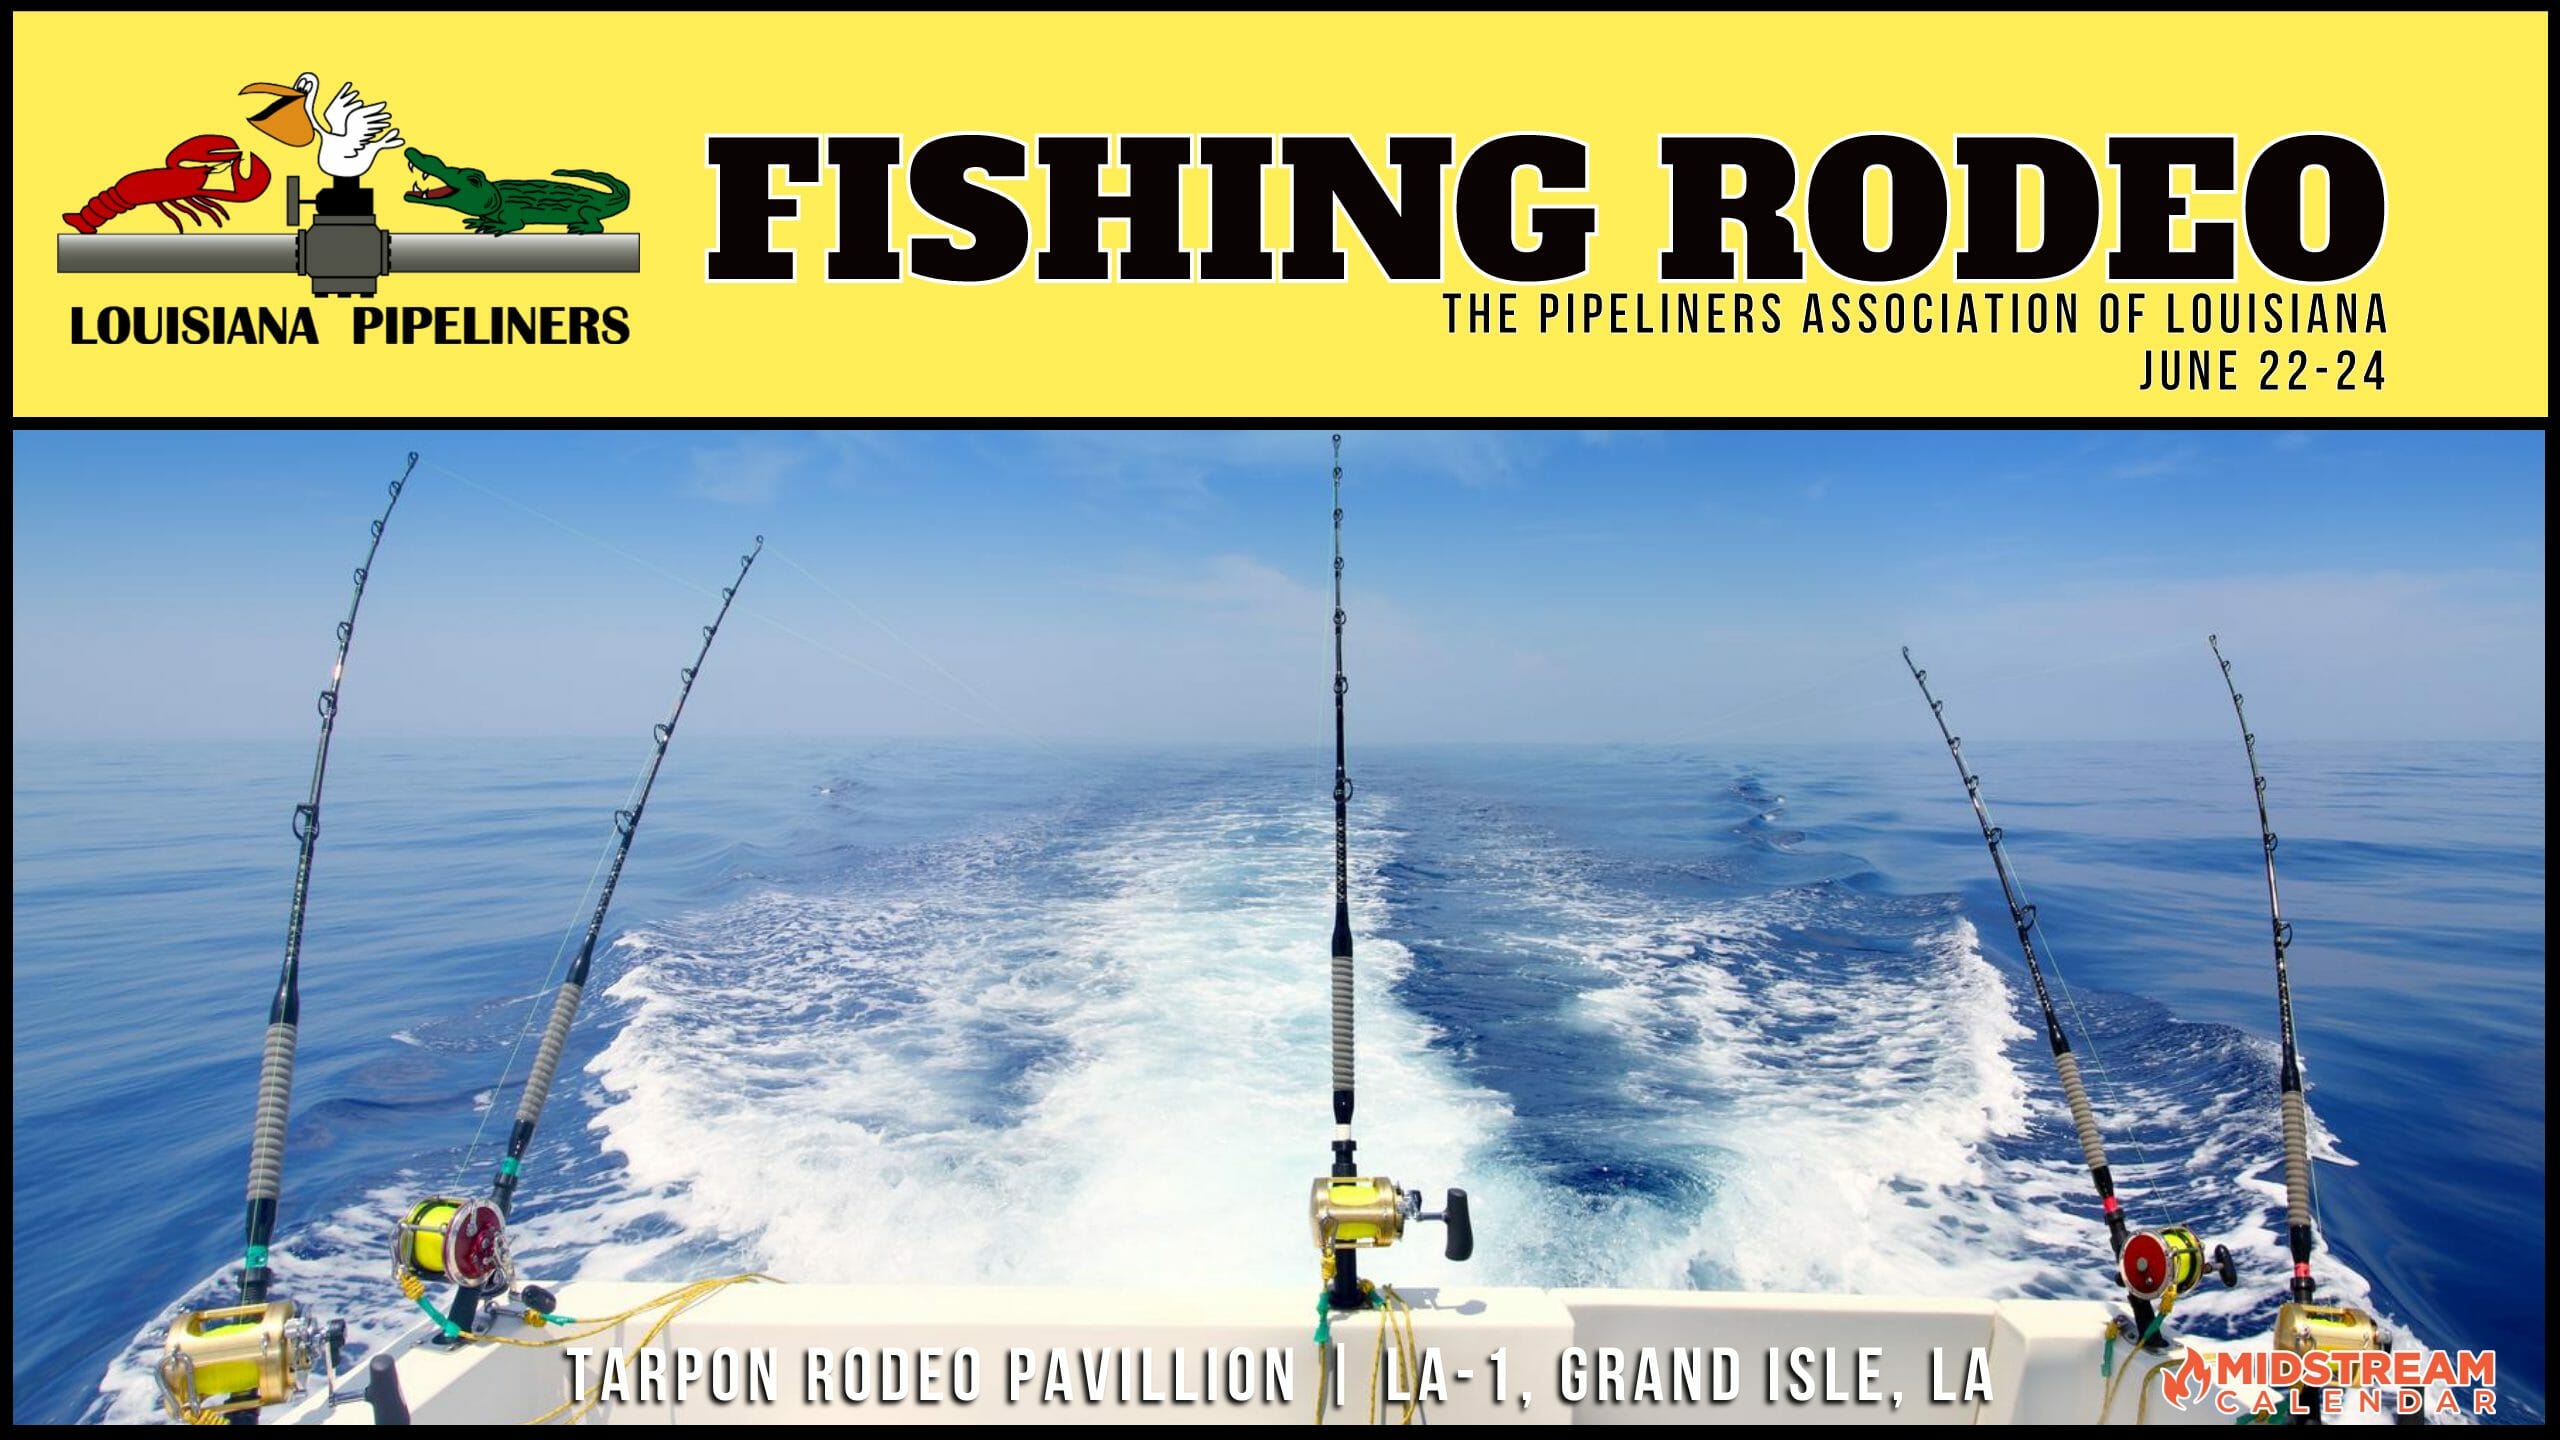 Register Now for the 2023 Louisiana Pipeliners 10th Annual Fishing